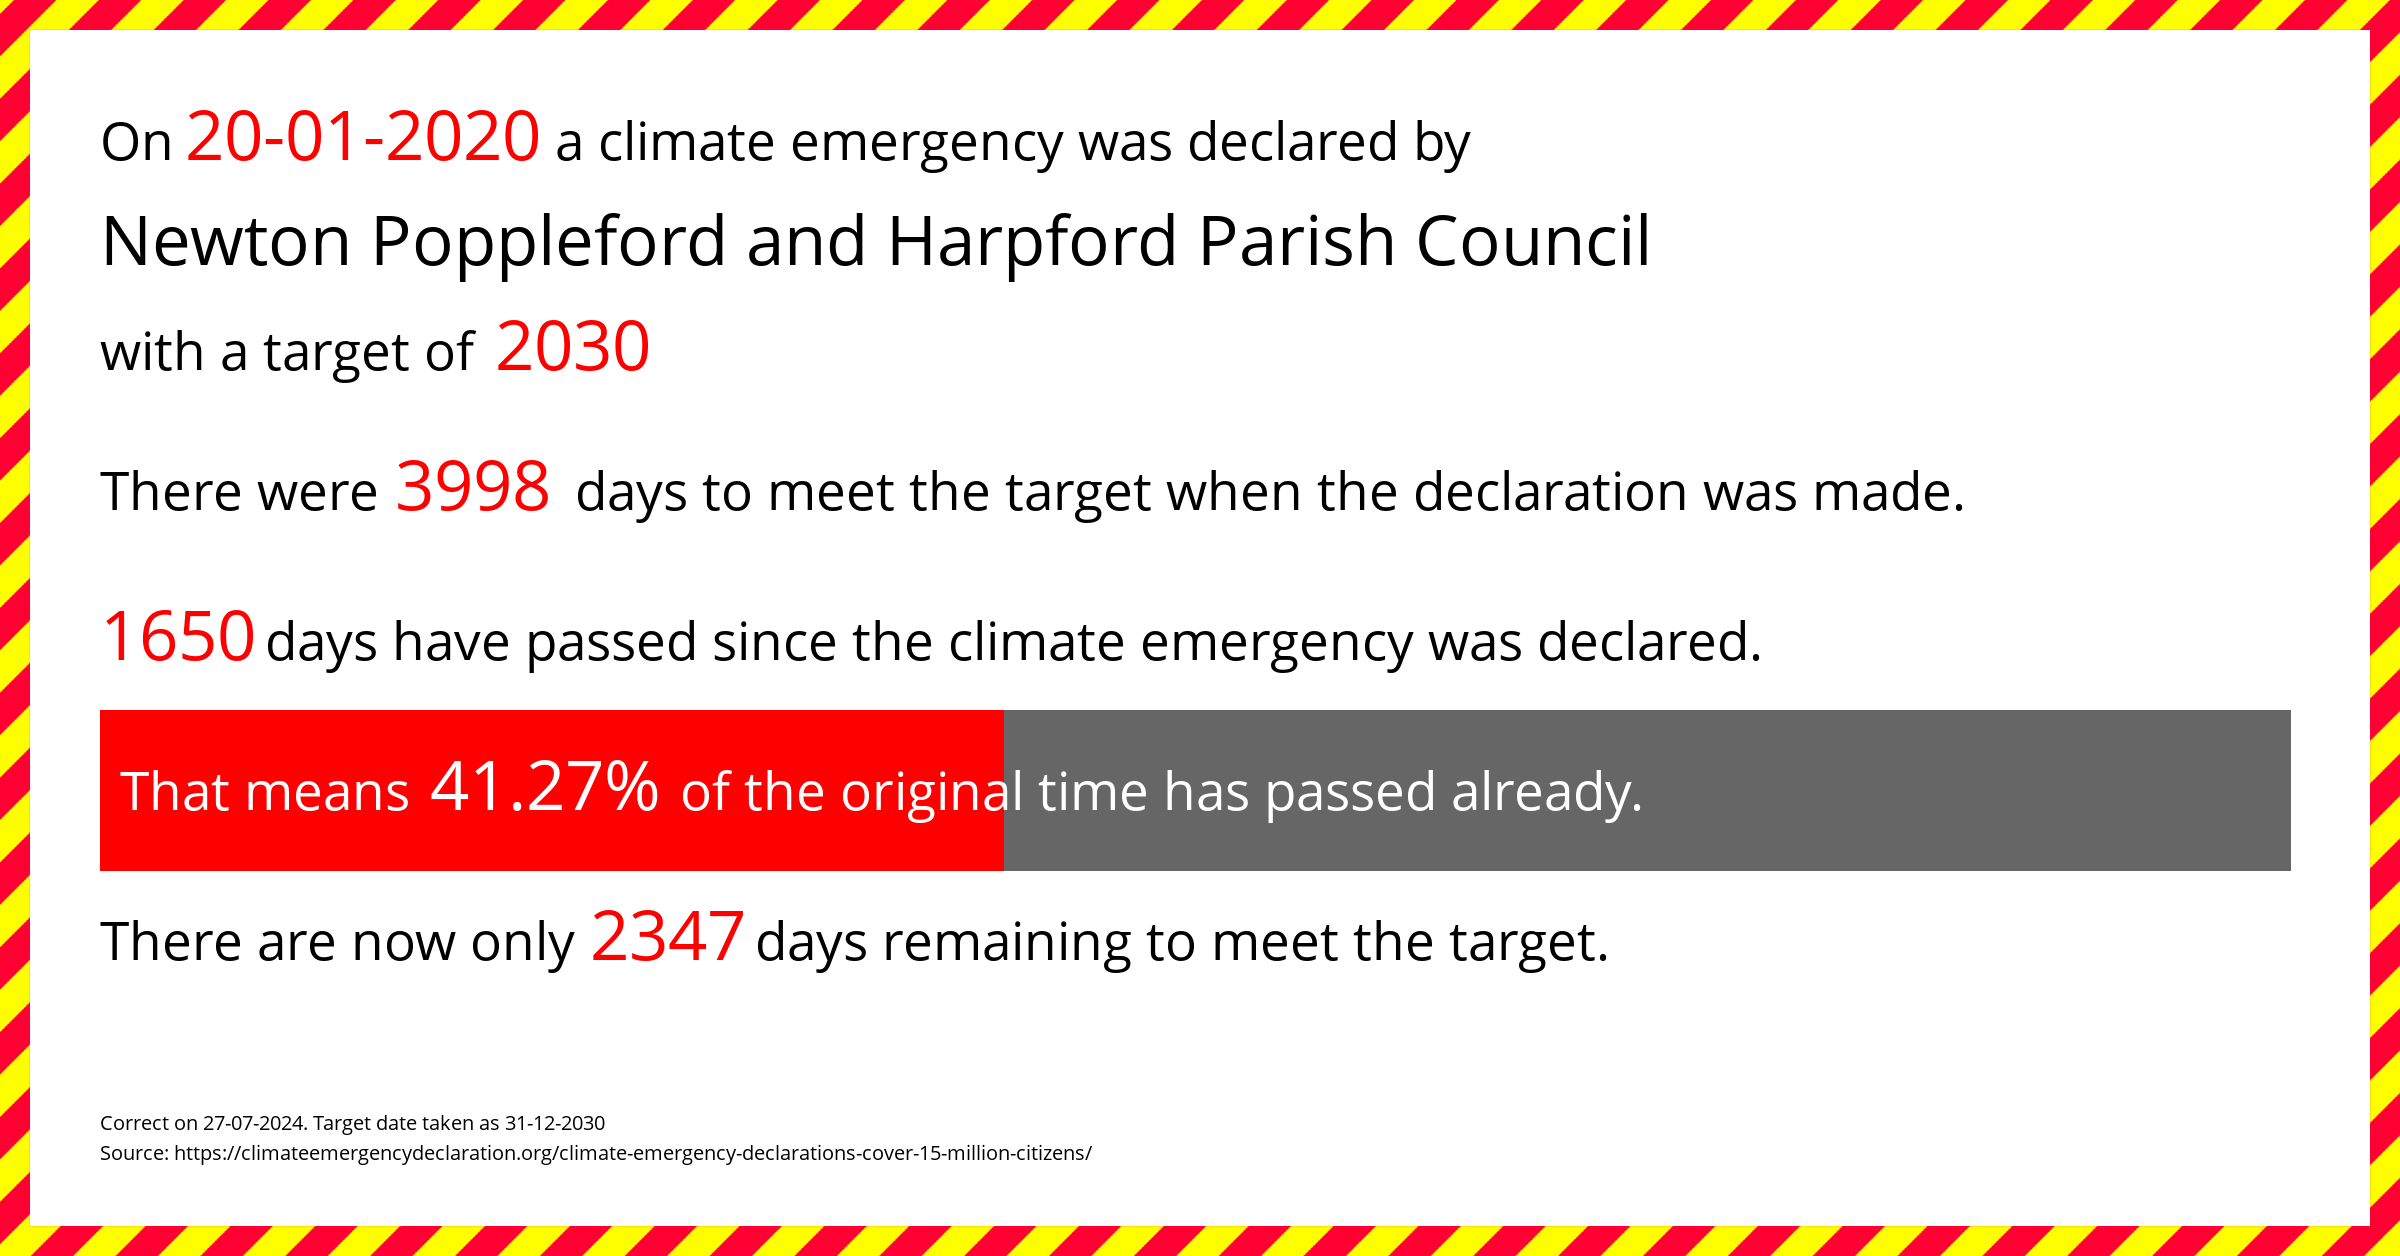 Newton Poppleford and Harpford Parish Council declared a Climate emergency on Monday 20th January 2020, with a target of 2030.